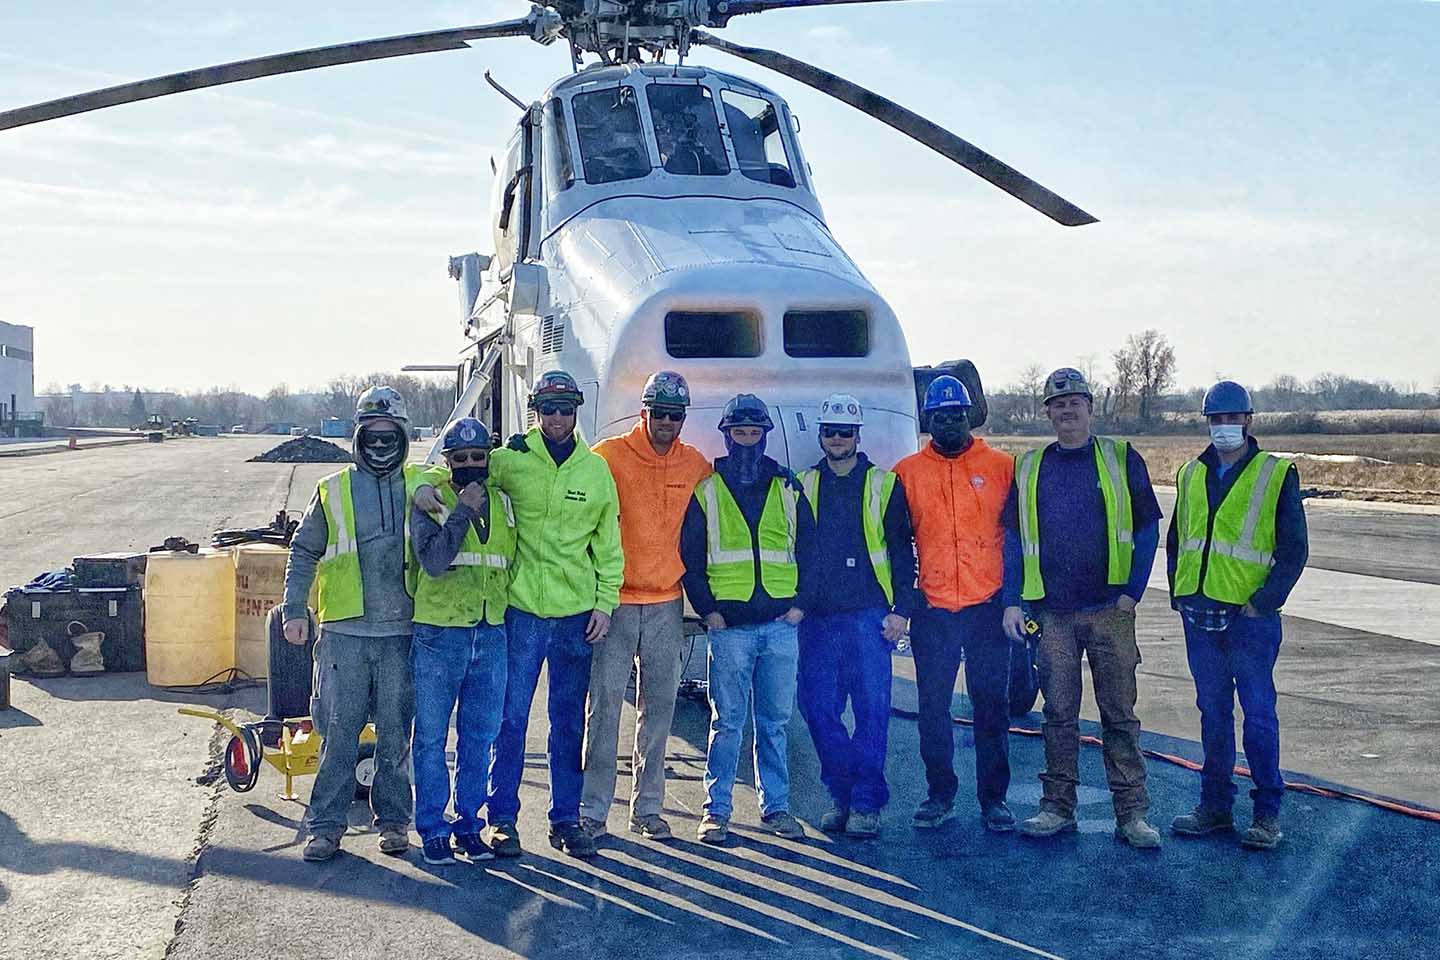 Helicopter Roof Crew Group Picture